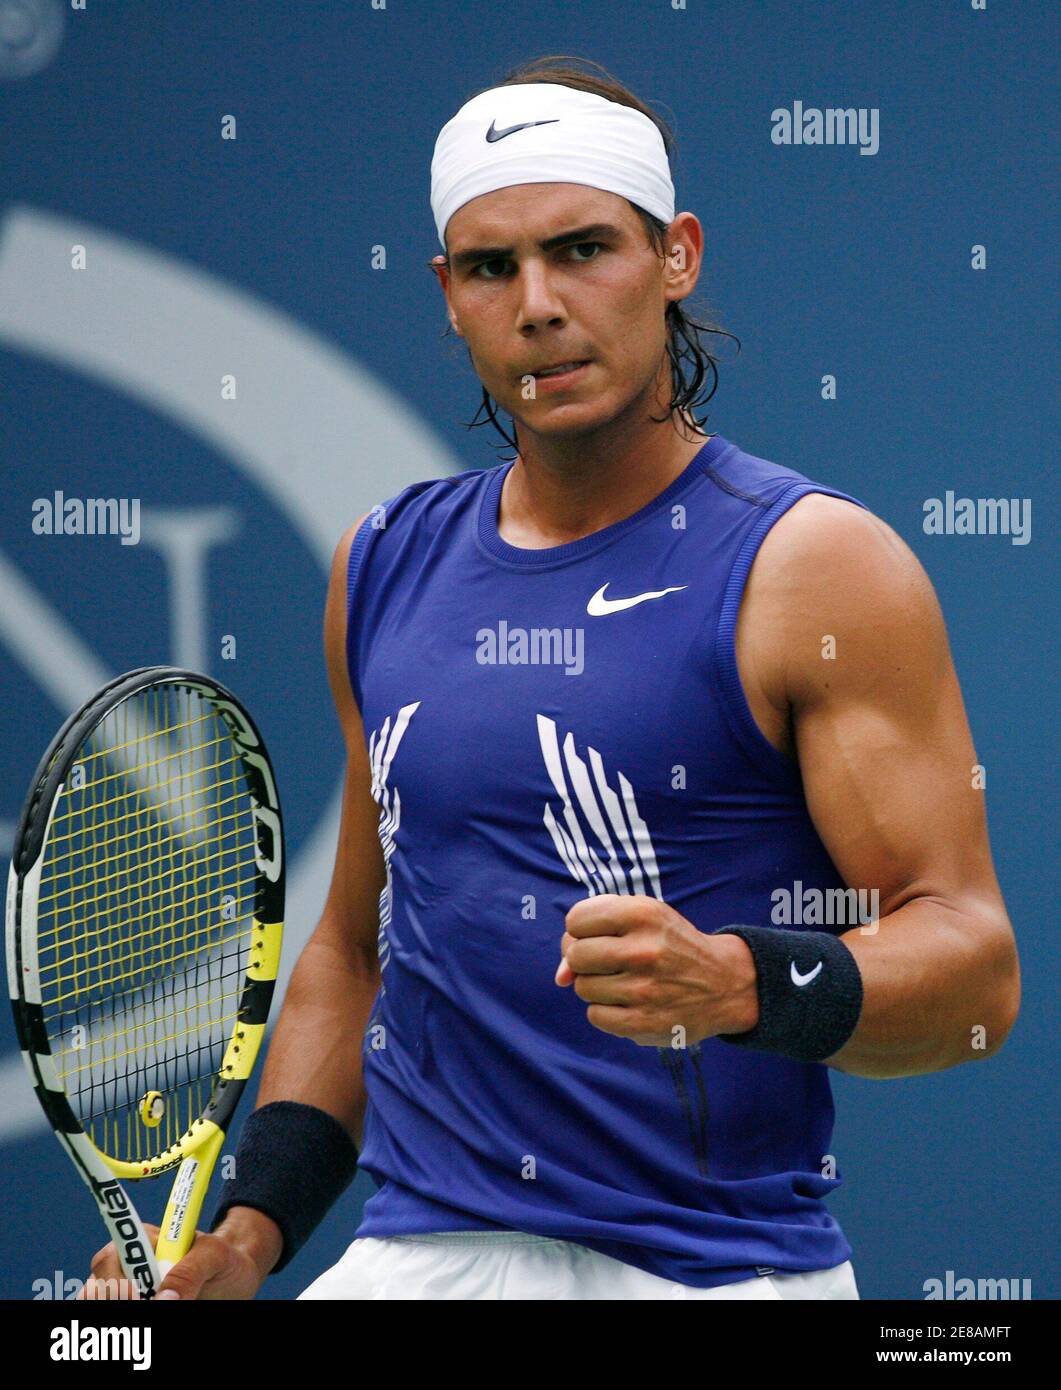 Rafael Nadal of Spain pumps his fist after a point against Bjorn Phau of  Germany during their match at the U.S. Open tennis tournament in Flushing  Meadows, New York August 25, 2008.